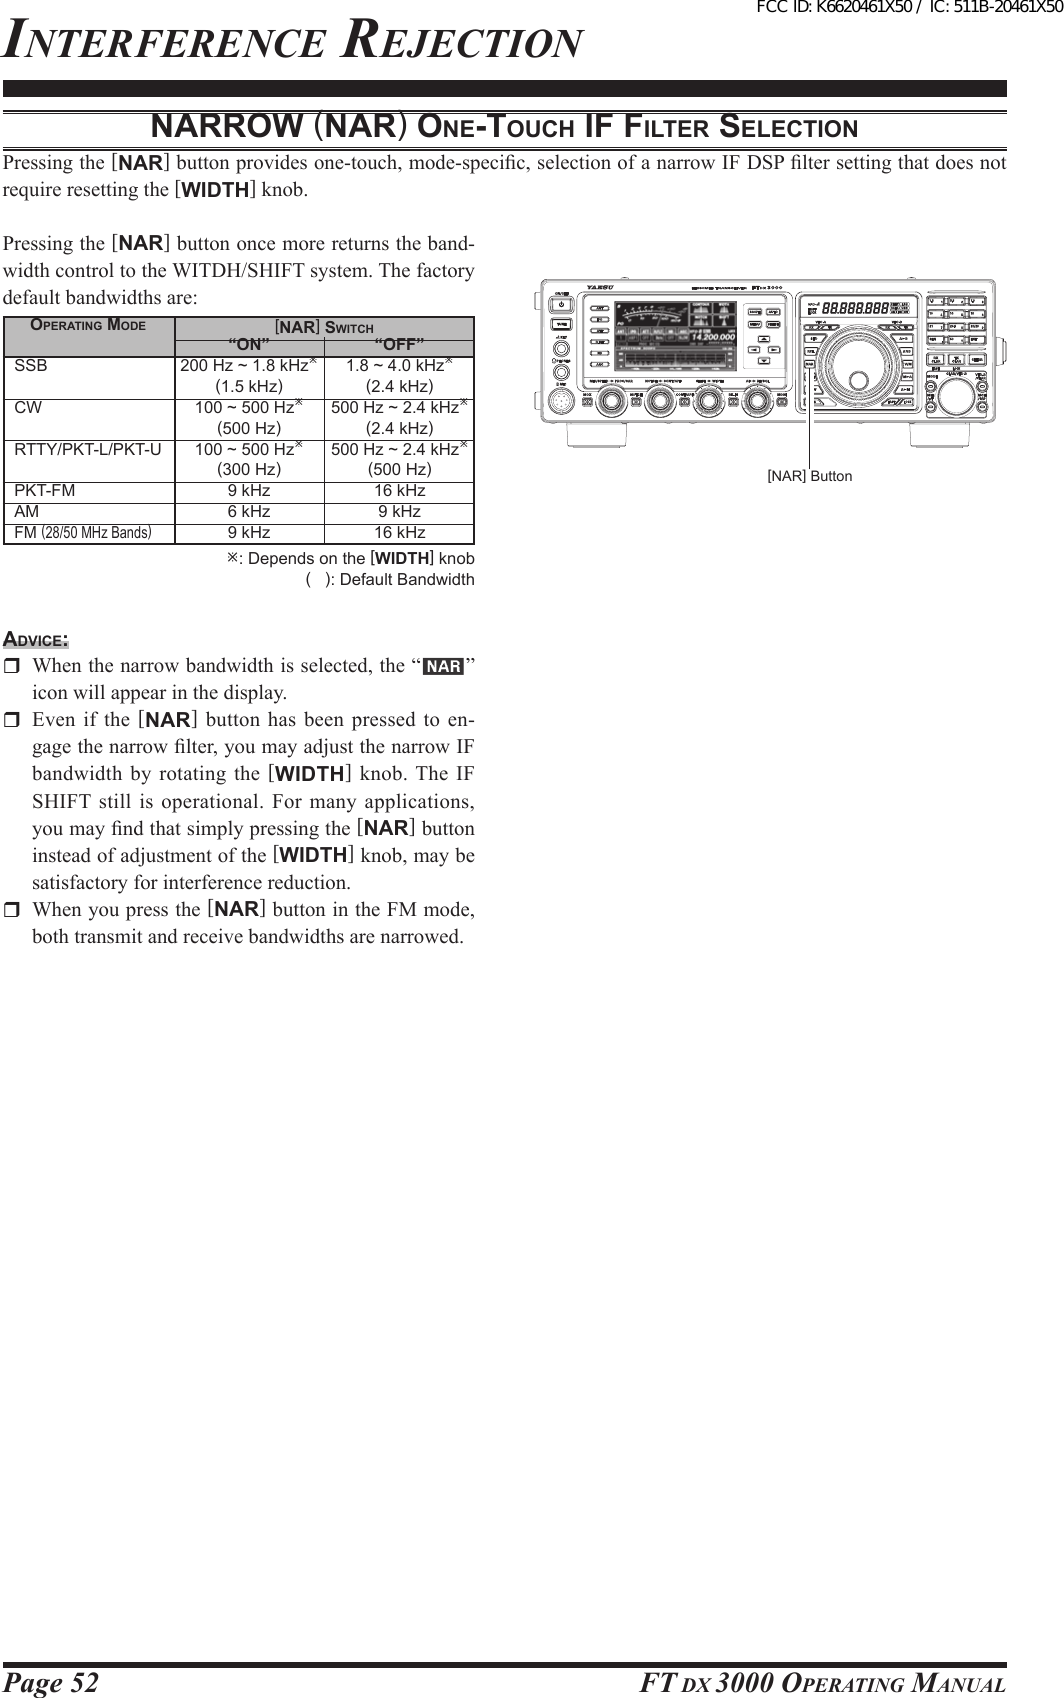 Page 52 FT DX 3000 OperaTing ManualinTerFerence rejecTiOnNARRow (NAR) oNe-toucH iF FilteR selectioNPressing the [NAR] button provides one-touch, mode-specic, selection of a narrow IF DSP lter setting that does not require resetting the [WIDTH] knob.Pressing the [NAR] button once more returns the band-width control to the WITDH/SHIFT system. The factory default bandwidths are:: Depends on the [WIDTH] knob(   ): Default BandwidthopeRAtiNg Mode SSB   CW   RTTY/PKT-L/PKT-U PKT-FMAMFM (28/50 MHz Bands)  “oN”200 Hz ~ 1.8 kHz(1.5 kHz)100 ~ 500 Hz(500 Hz)100 ~ 500 Hz(300 Hz)9 kHz6 kHz9 kHz “oFF”1.8 ~ 4.0 kHz(2.4 kHz)500 Hz ~ 2.4 kHz(2.4 kHz)500 Hz ~ 2.4 kHz(500 Hz)16 kHz9 kHz16 kHz[NAR] switcHAdvice:  When the narrow bandwidth is selected, the “ ” icon will appear in the display.  Even  if  the  [NAR] button has been pressed to en-gage the narrow lter, you may adjust the narrow IF bandwidth  by  rotating  the  [WIDTH]  knob. The  IF SHIFT  still is operational. For many applications, you may nd that simply pressing the [NAR] button instead of adjustment of the [WIDTH] knob, may be satisfactory for interference reduction.  When you press the [NAR] button in the FM mode, both transmit and receive bandwidths are narrowed.[NAR] ButtonFCC ID: K6620461X50 / IC: 511B-20461X50